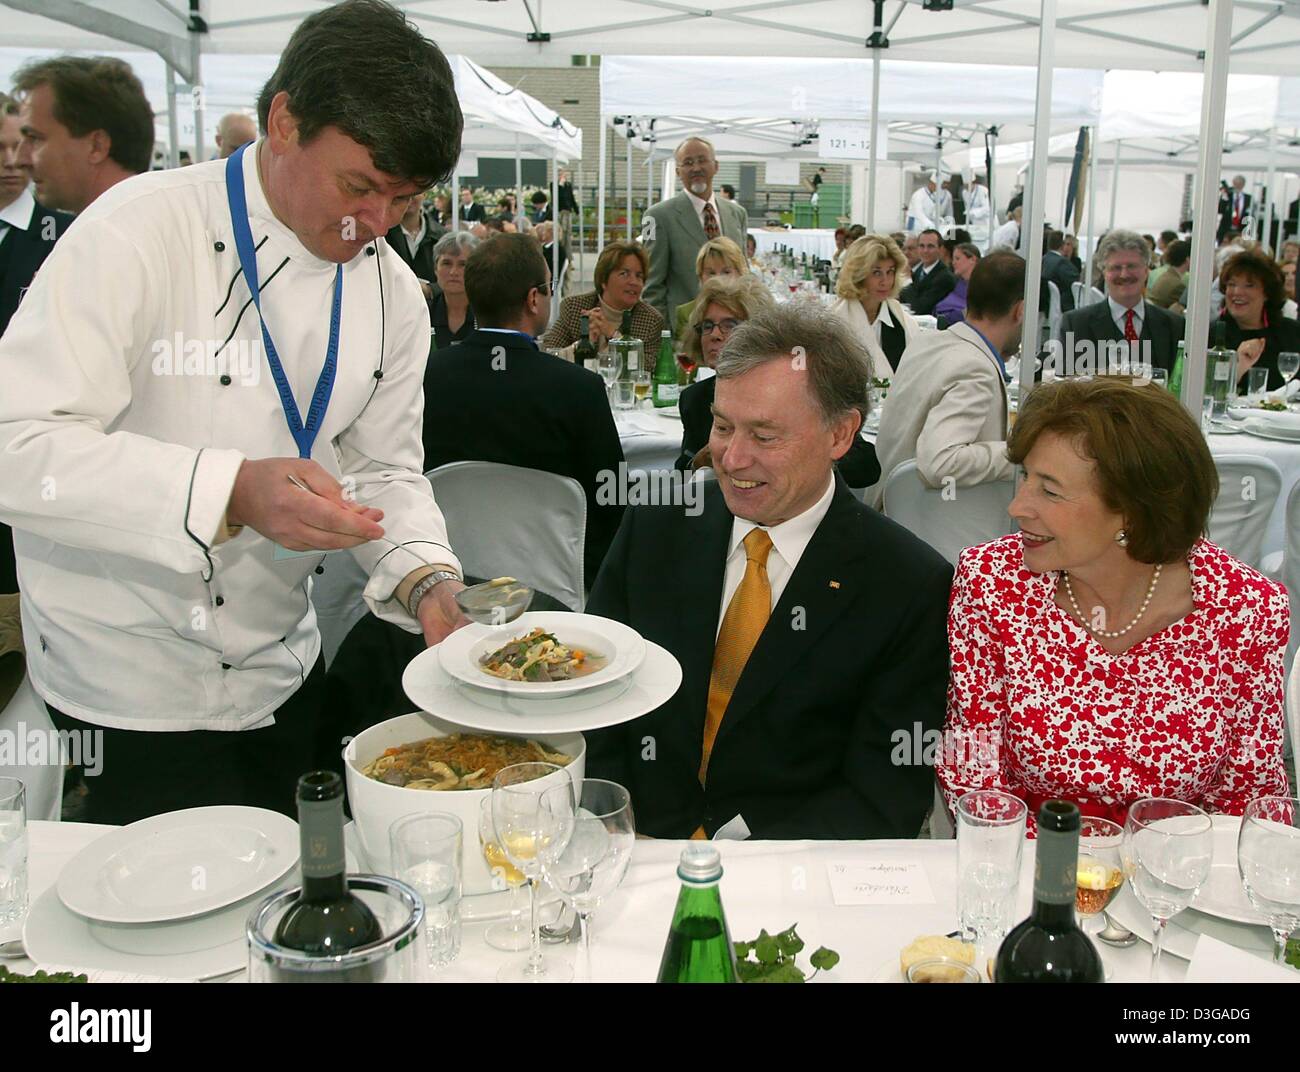 (dpa) - New German President Horst Koehler (C) and his wife Eva (R) look on as three-star chef Harald Wohlfahrt serves a German stew during Koehler's first public appearance as President during the 'Table of Democracy' dinner in front of Berlin's landmark Brandenburg Gate, 3 July 2004. The dinner, at which 1,200 citizens from eastern and western Germany took place, was organized to Stock Photo